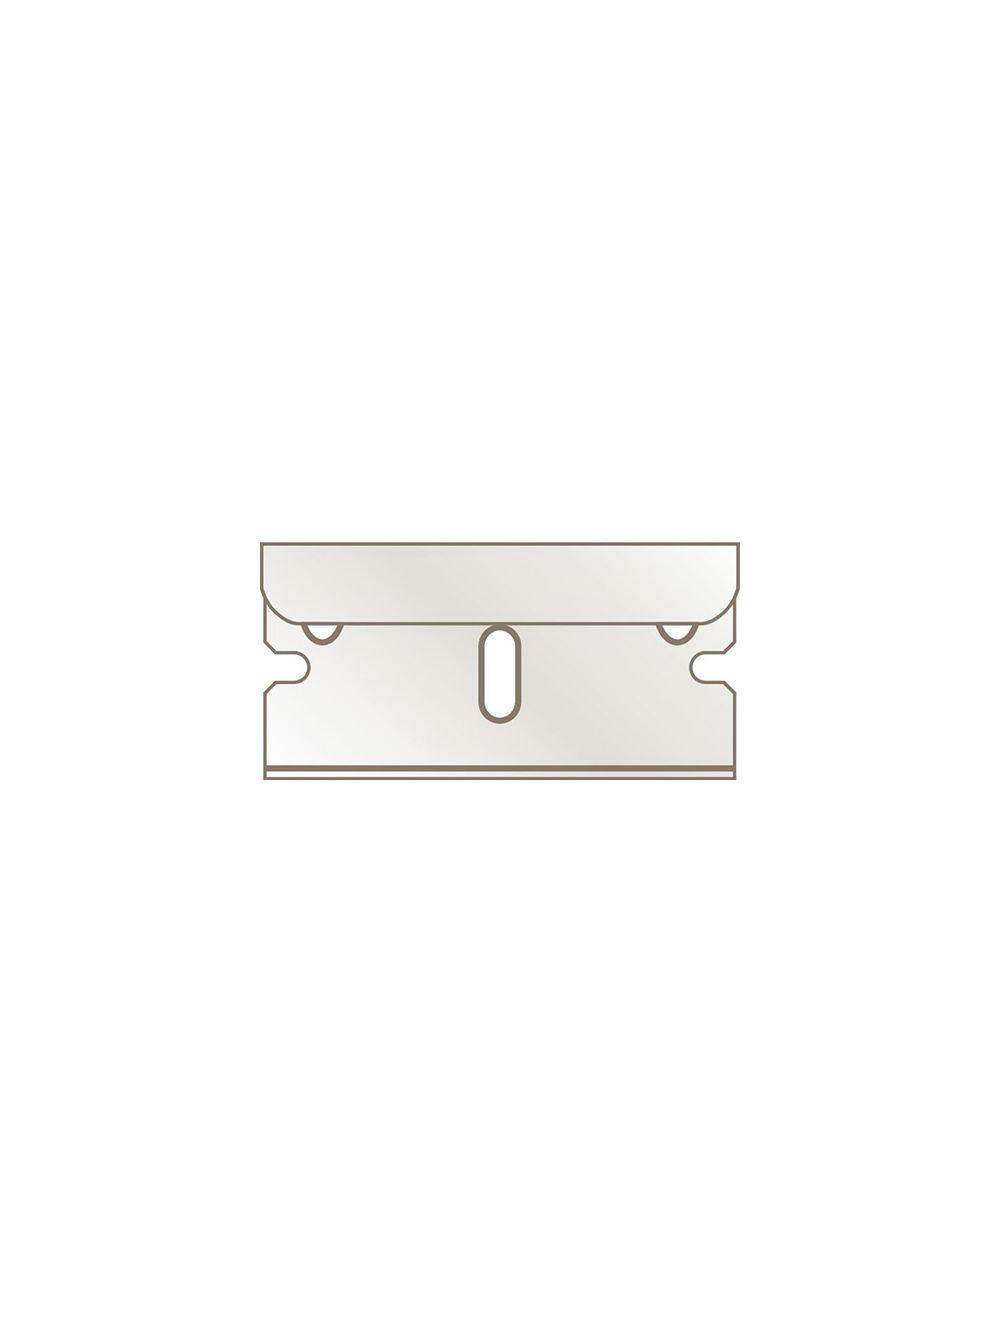 Martor Reinforced Razor Blade No. 144, 0.25 mm, Stainless (Pack Of 10)